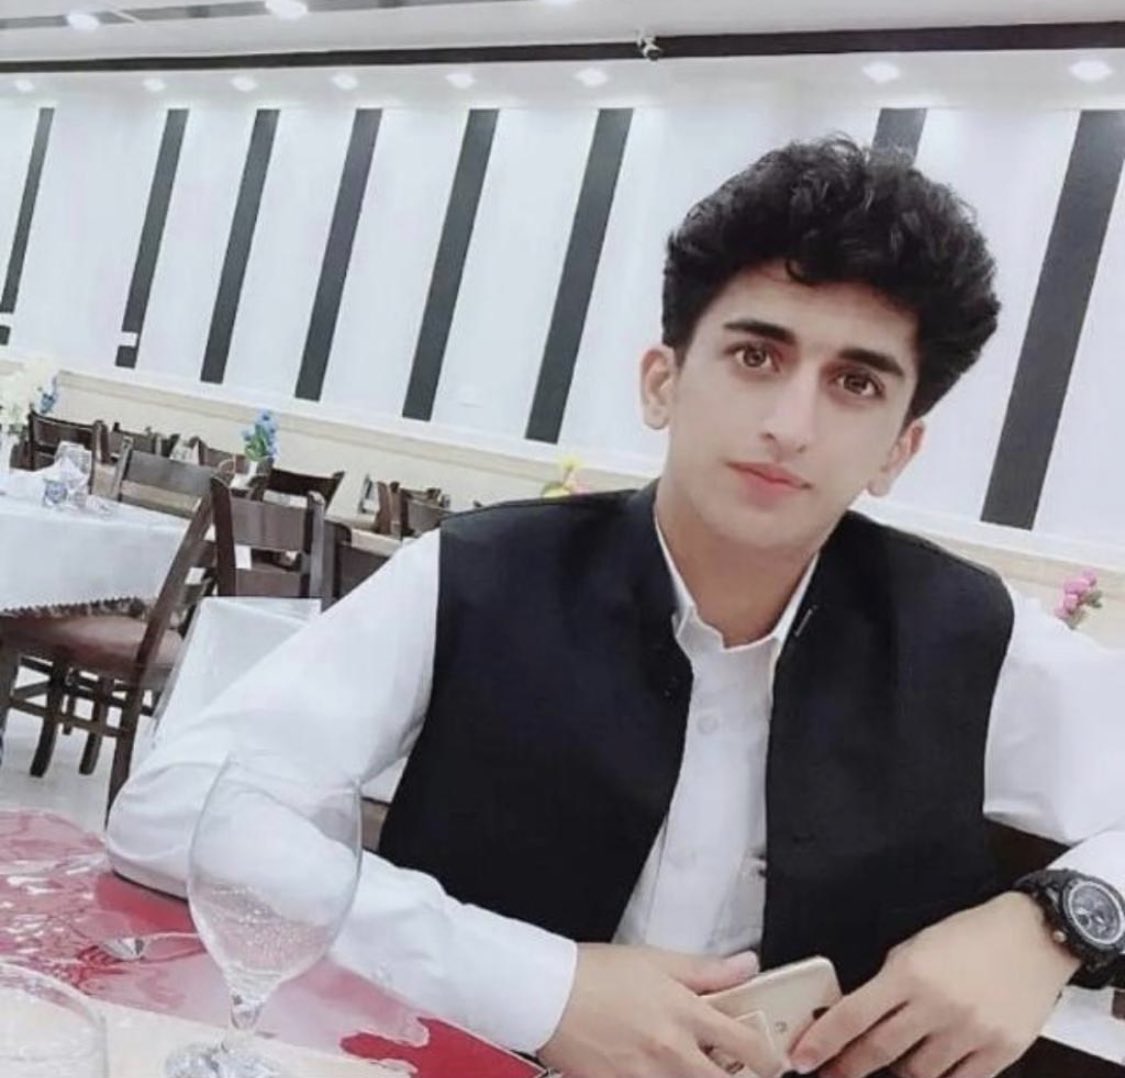 Two young Baluch men are at imminent risk of execution in Iran; #ShoaibMirbalochzehiRigi, 19, and #KambizKharot٫ 20, were abducted by government agents last October in Zahedan icw the protests there. They were subjected to extreme torture and sentenced to death on bogus charges…